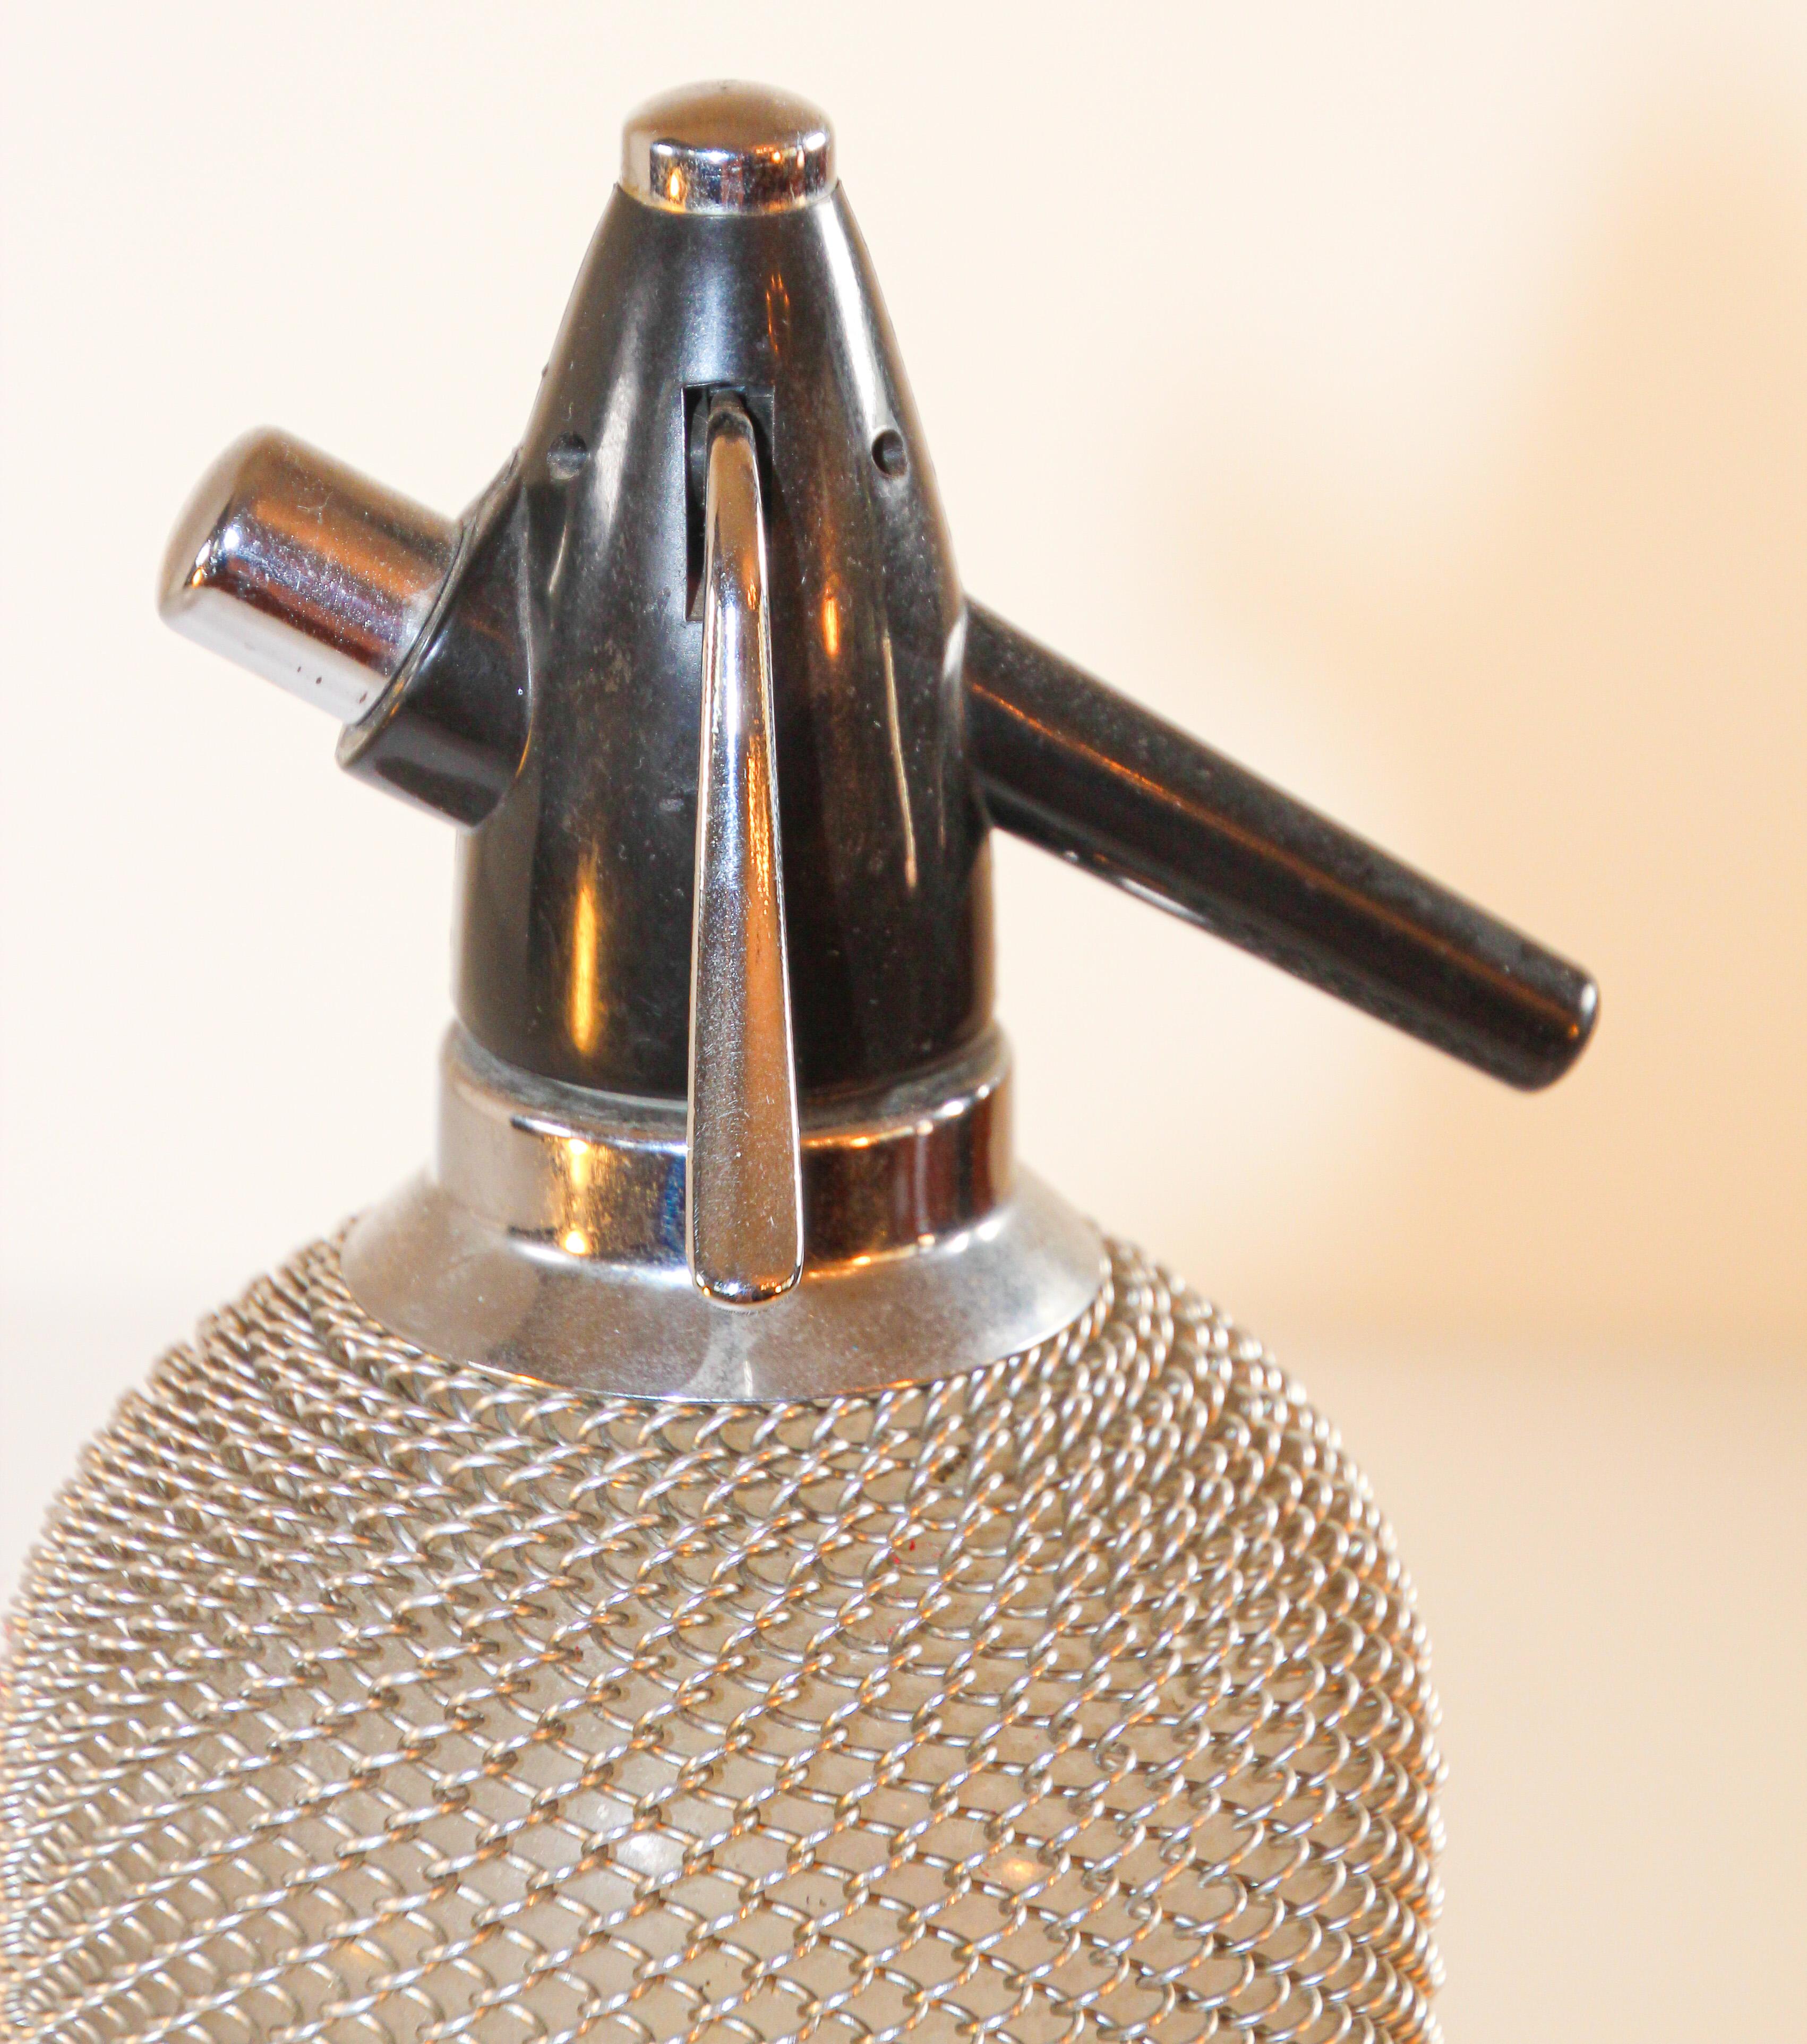 Hand-Crafted Vintage Classic Soda Siphon Seltzer Glass Bottle with Wire Mesh